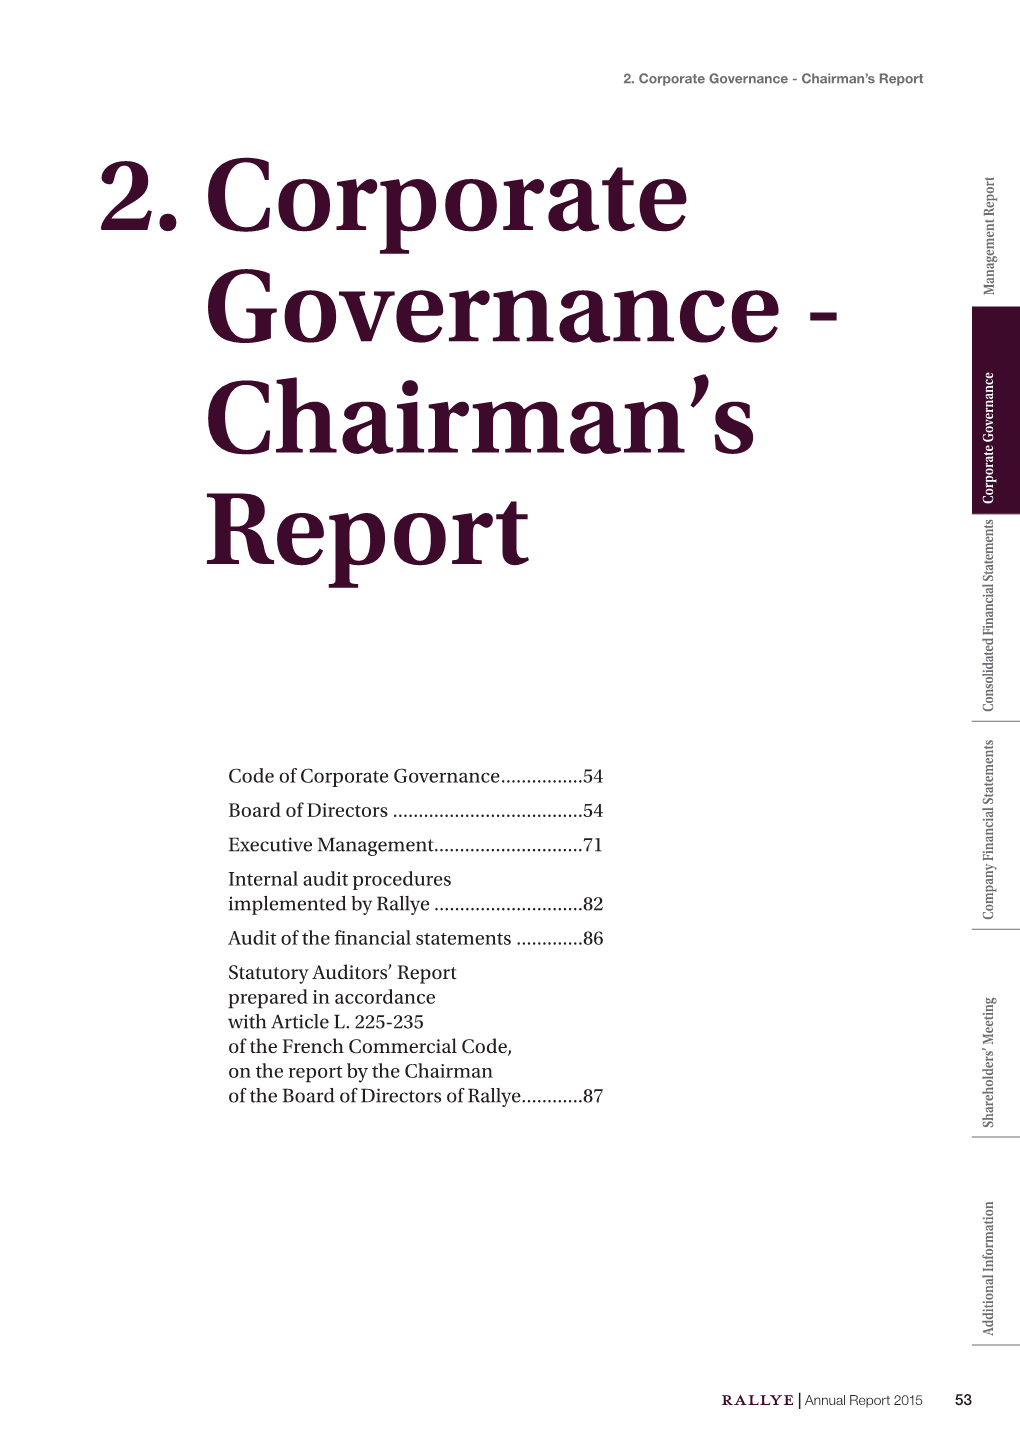 2. Corporate Governance - Chairman’S Report